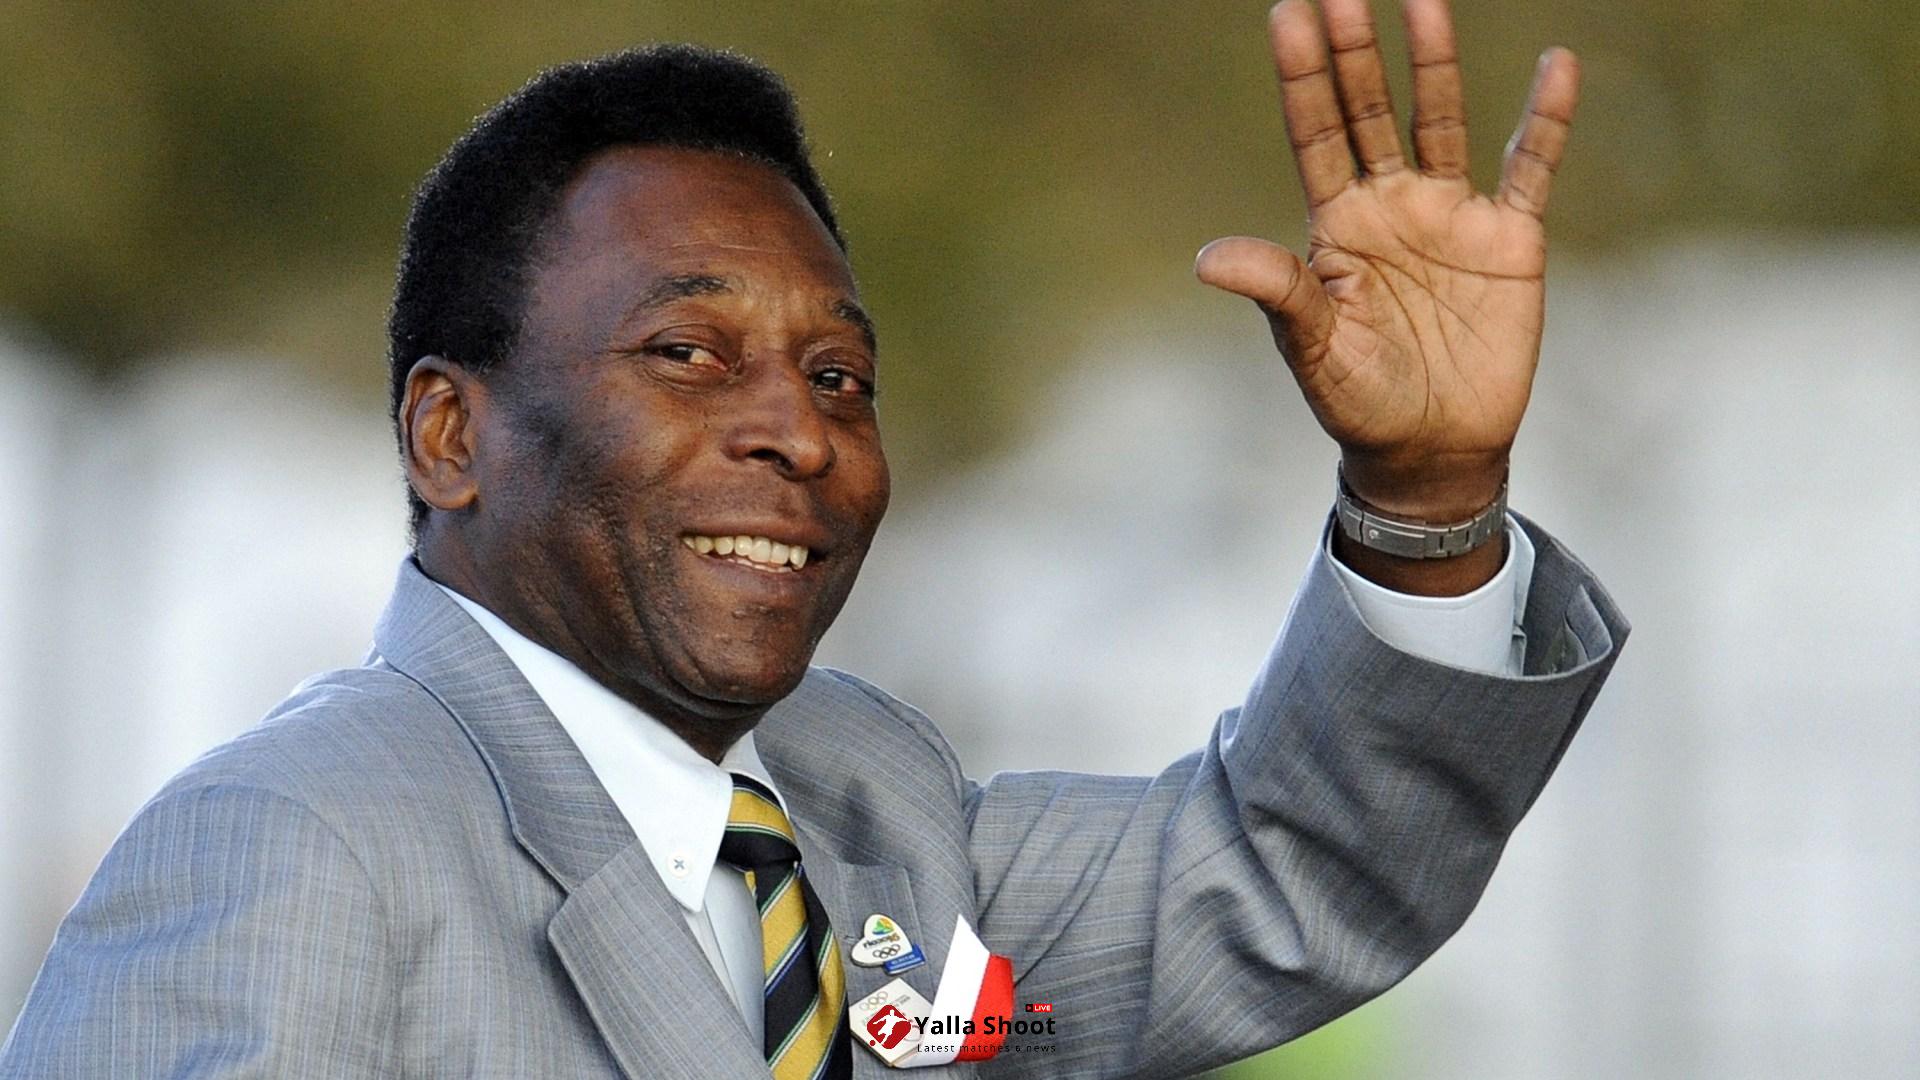 Woman claiming to be Pele's daughter demands Brazil football legend be dug up 13 months after death for paternity test